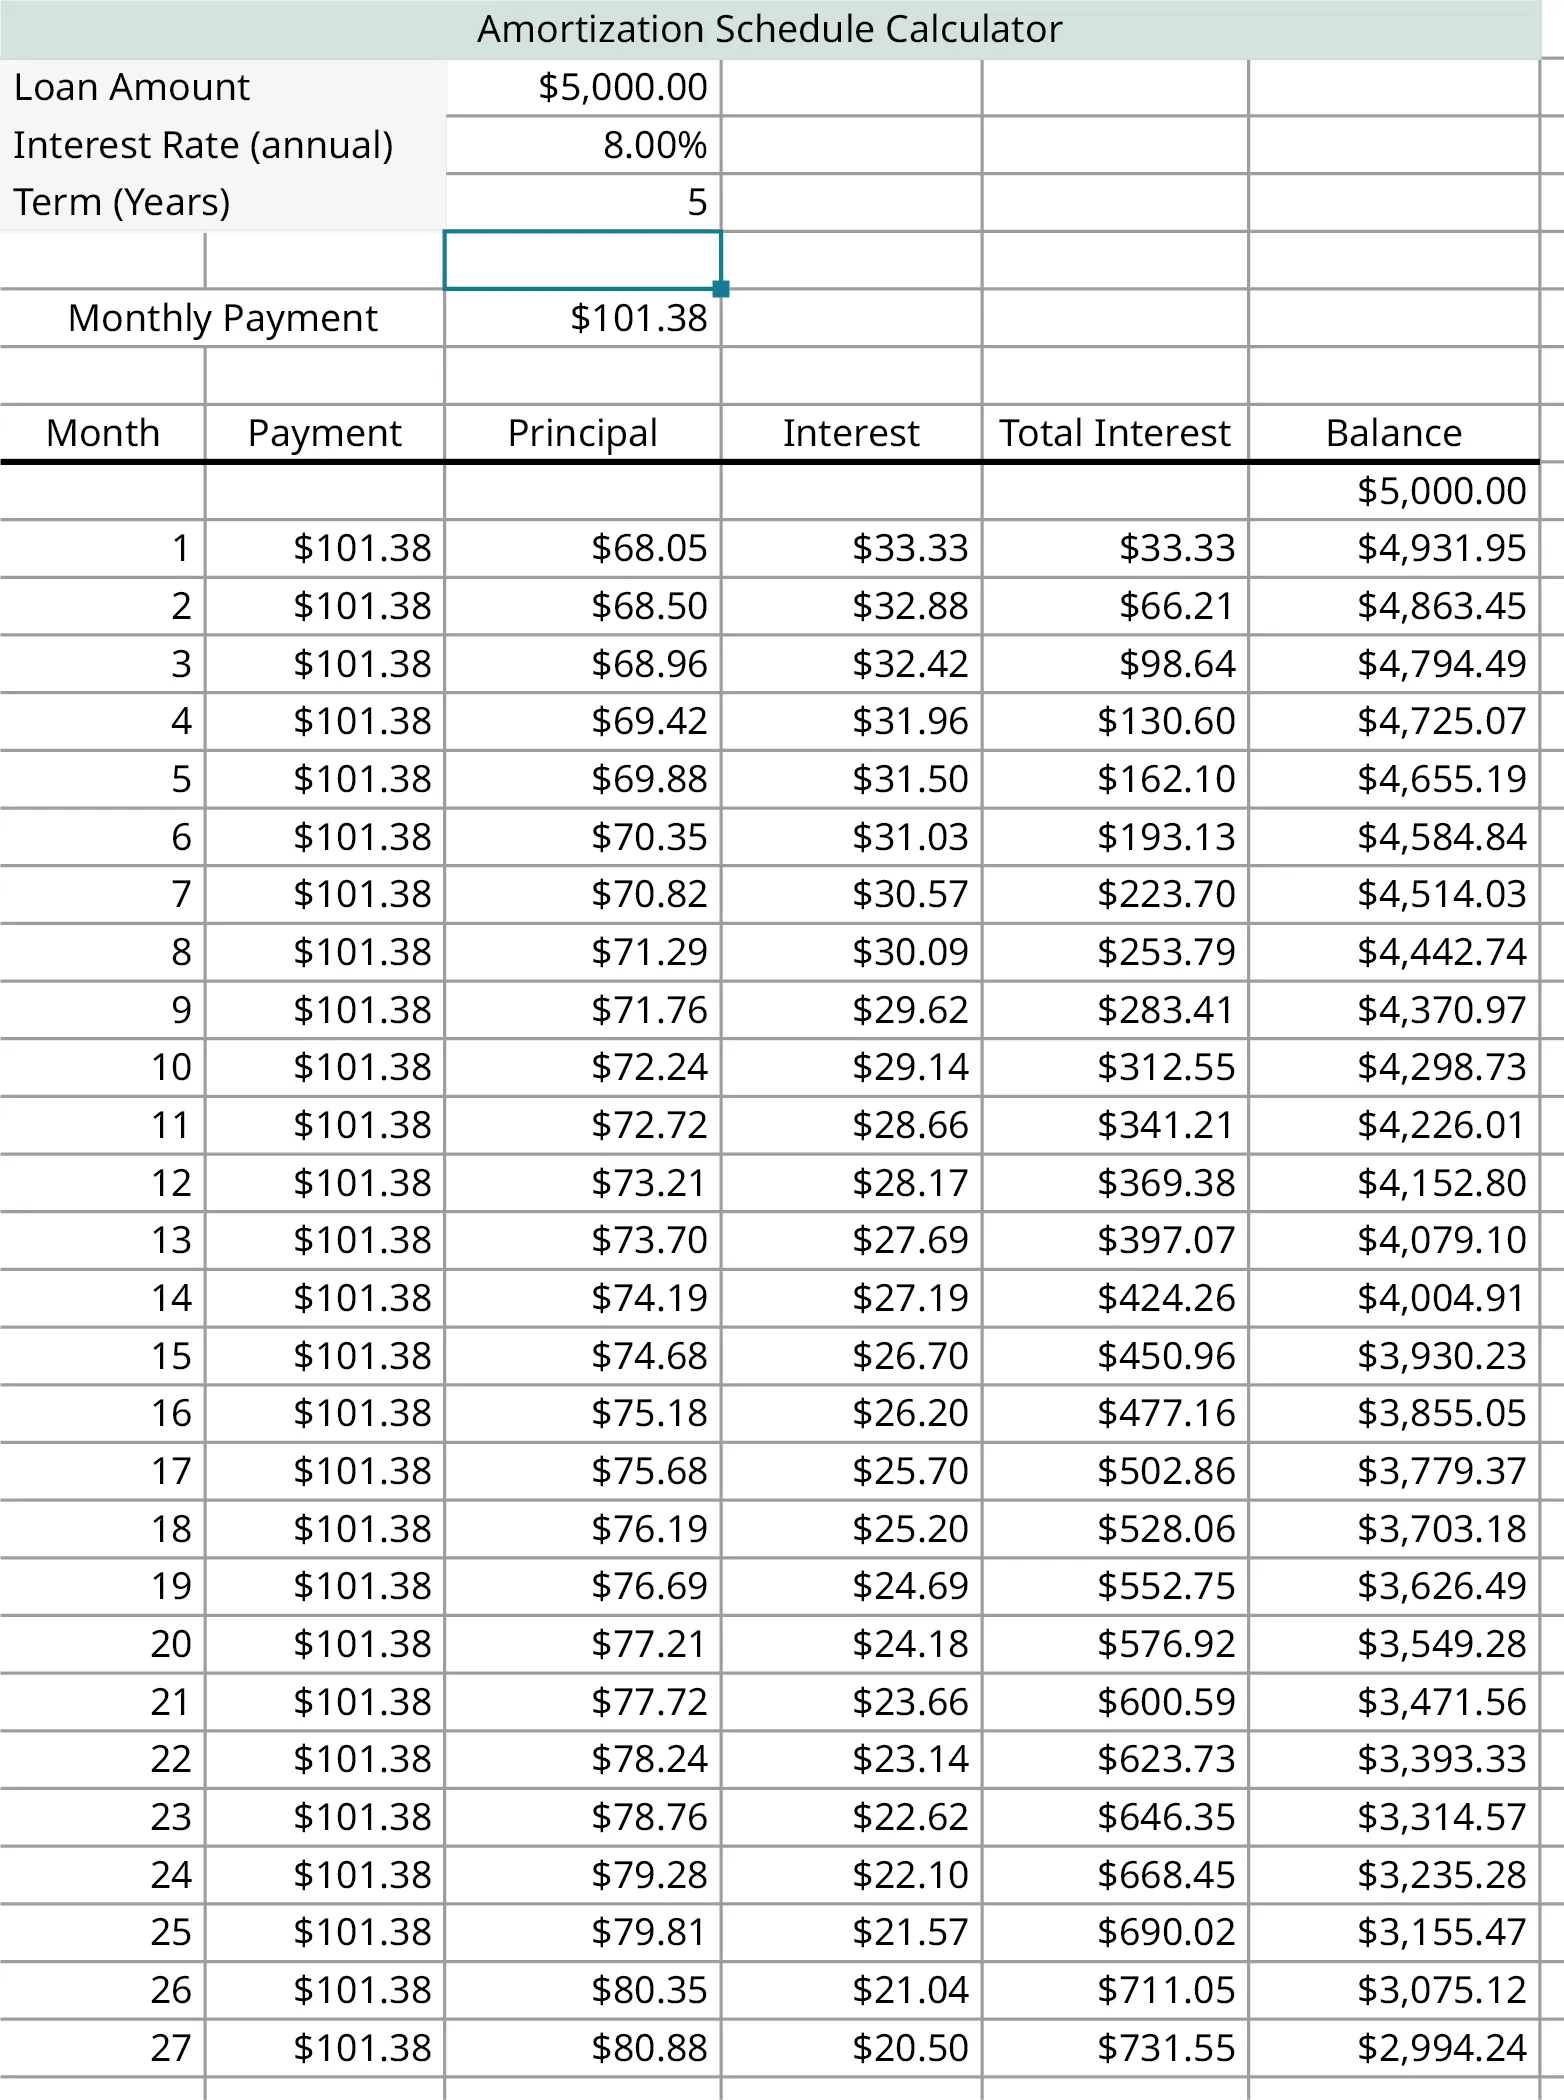 A spreadsheet labeled as amortization schedule calculator. The sheet calculates the repayment for the loan amount of $5,000.00 for an interest rate of 8 percent annually and the monthly payment is $101.38. The factors include calculations such as month, payment, principal, interest, total, and interest and balance.